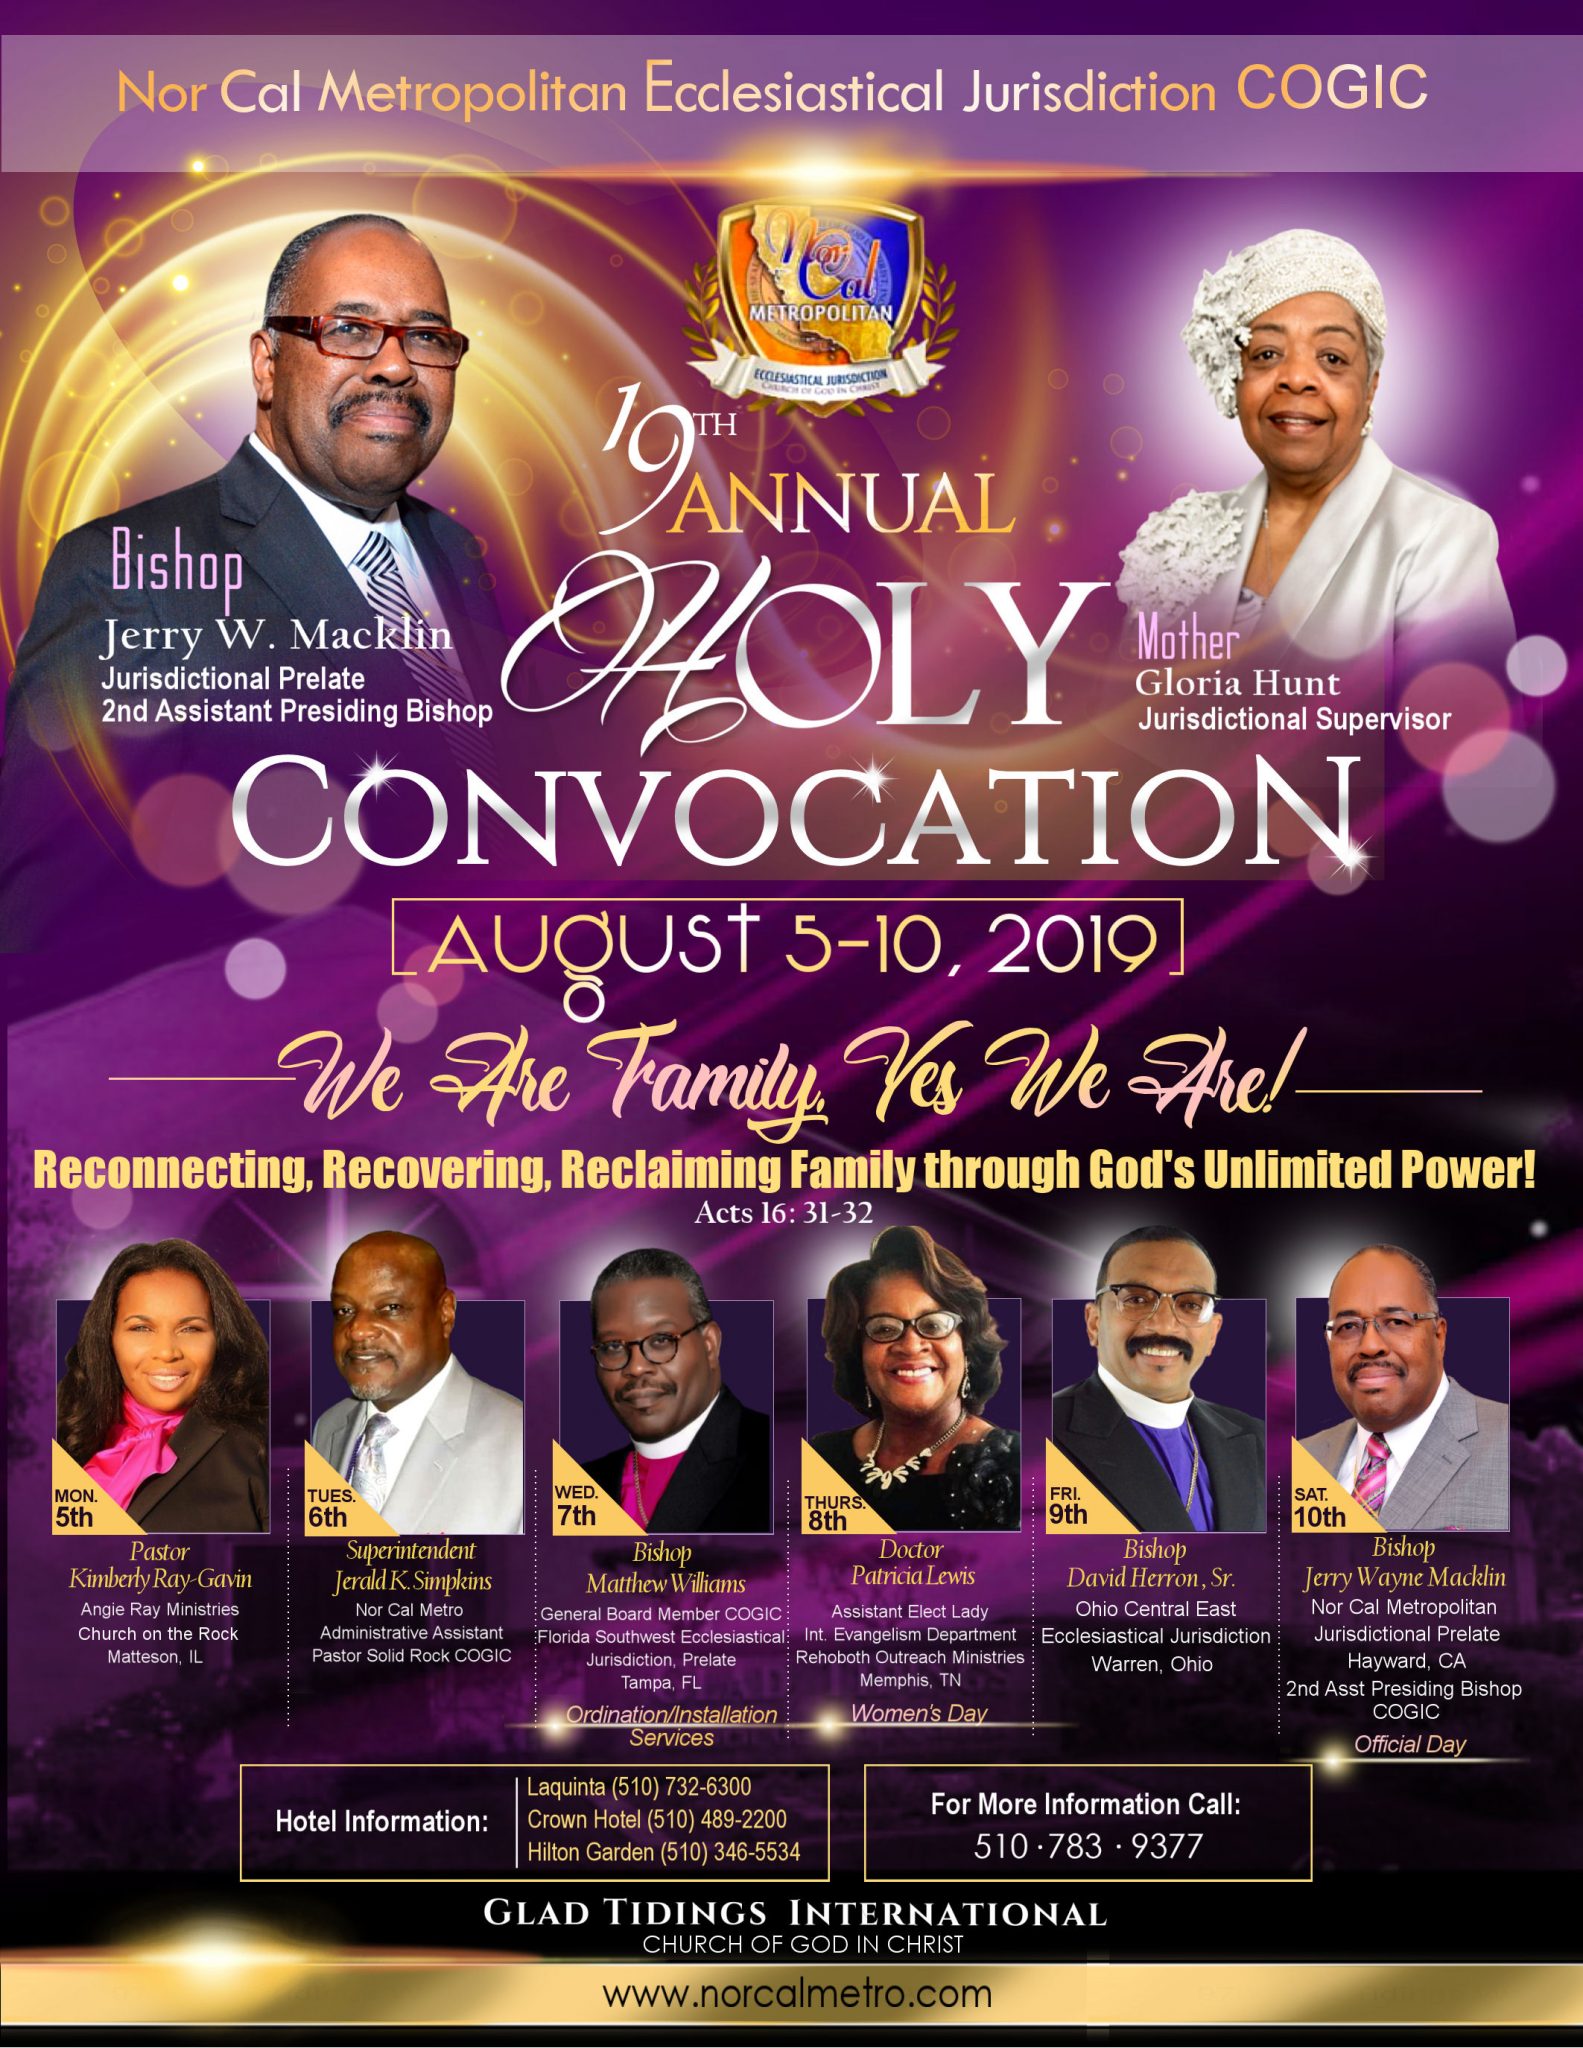 Nor Cal Metro COGIC Holy Convocation 2019